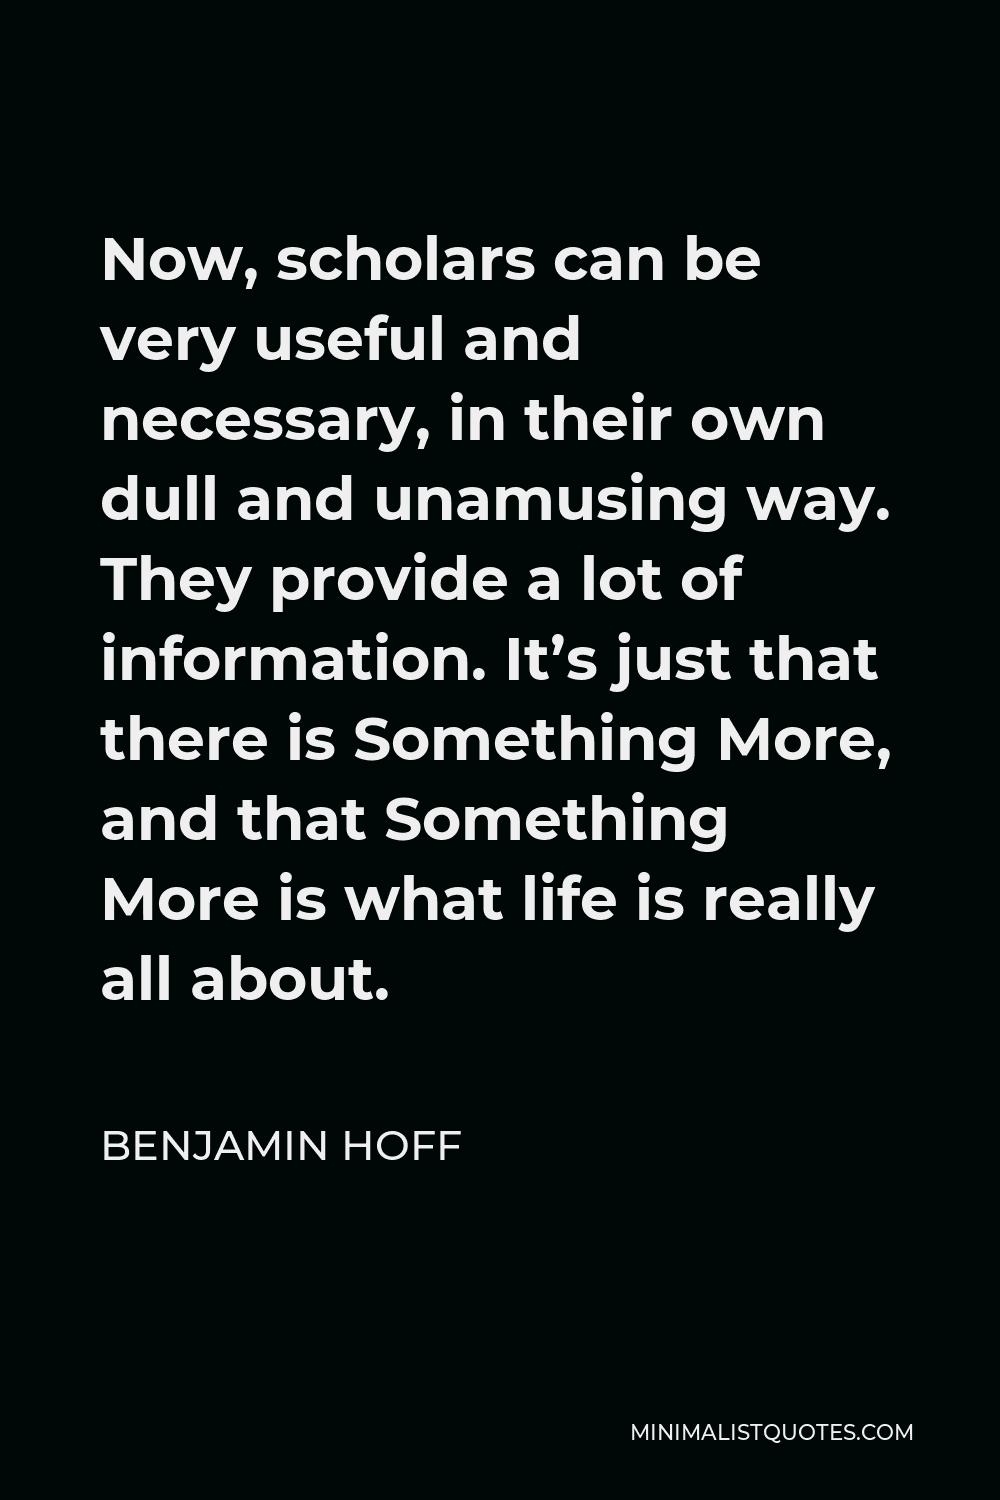 Benjamin Hoff Quote - Now, scholars can be very useful and necessary, in their own dull and unamusing way. They provide a lot of information. It’s just that there is Something More, and that Something More is what life is really all about.